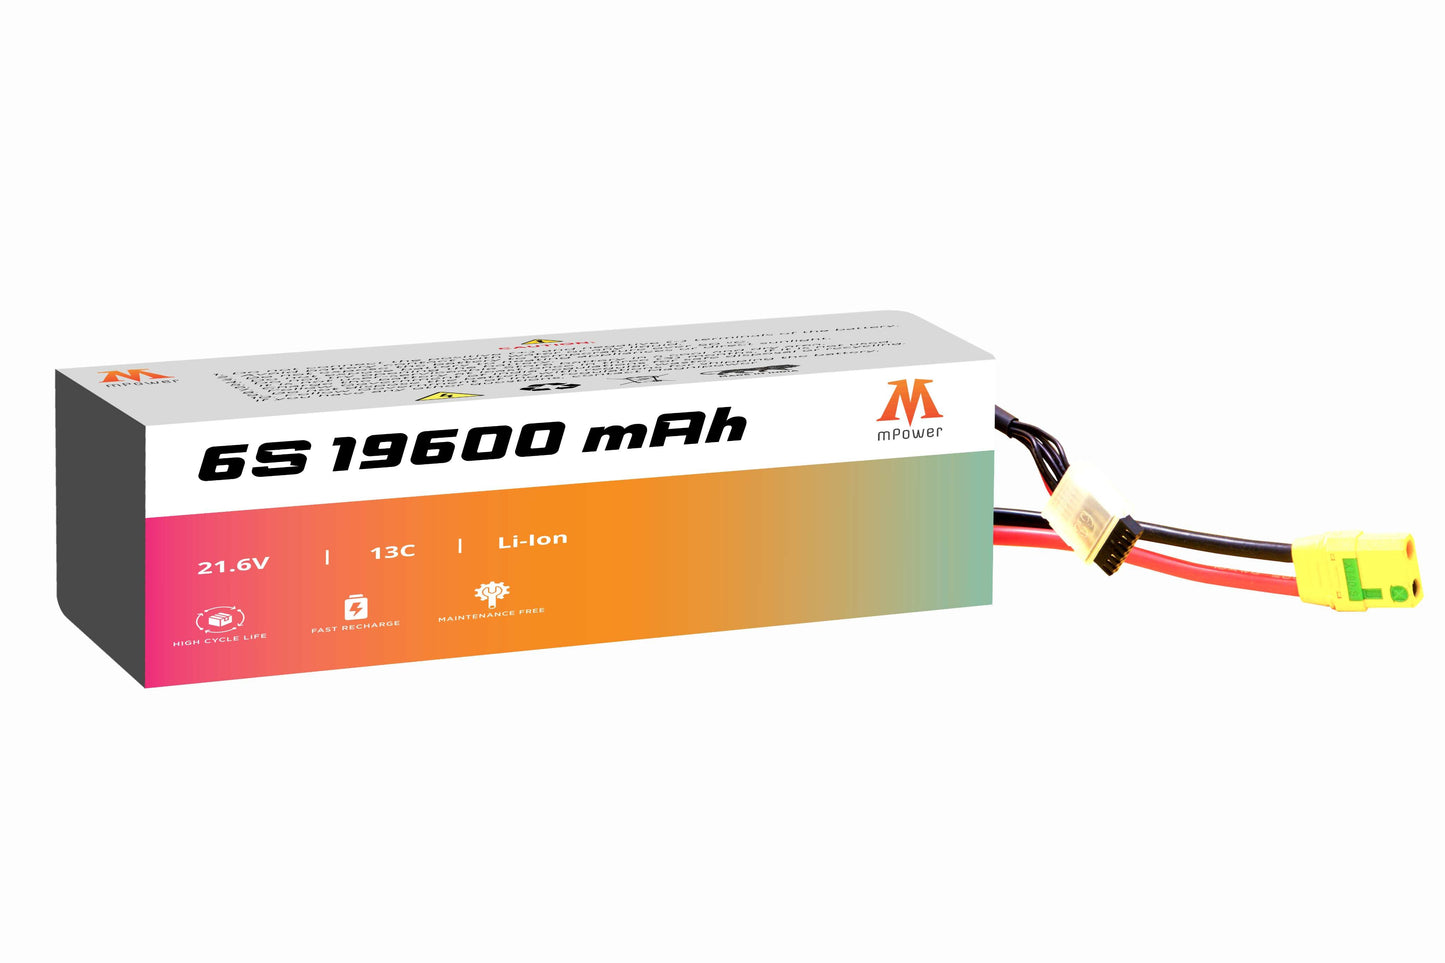 mPower 6S 19600mAh Lithium-Ion Battery for Surveillance Drones